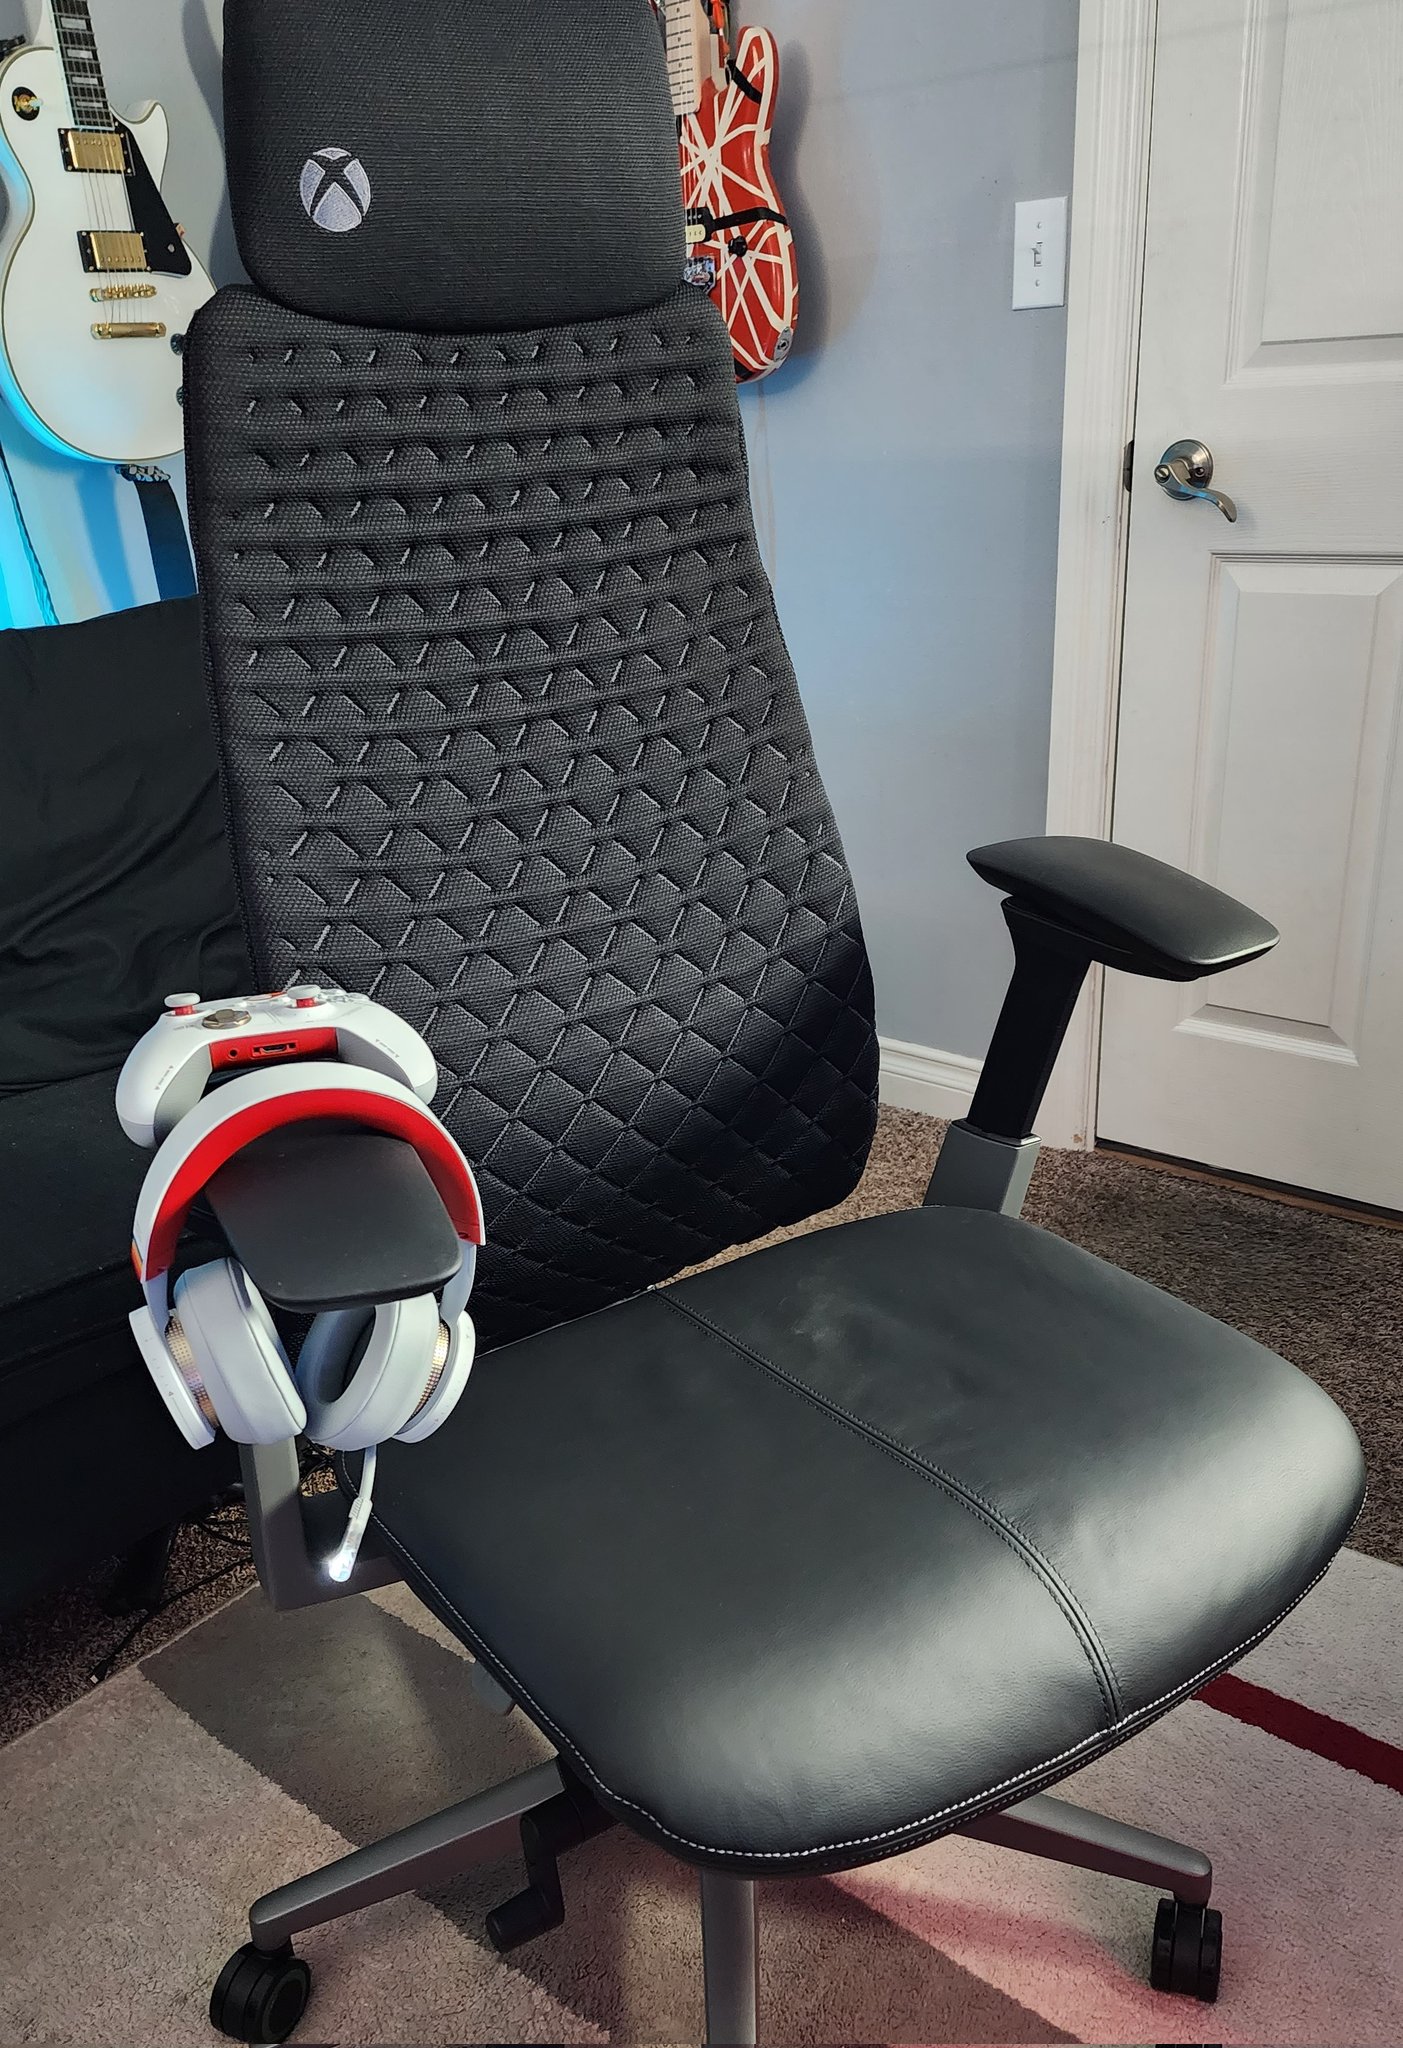 The Haworth Xbox gaming chair comes in 2 versions and it will let